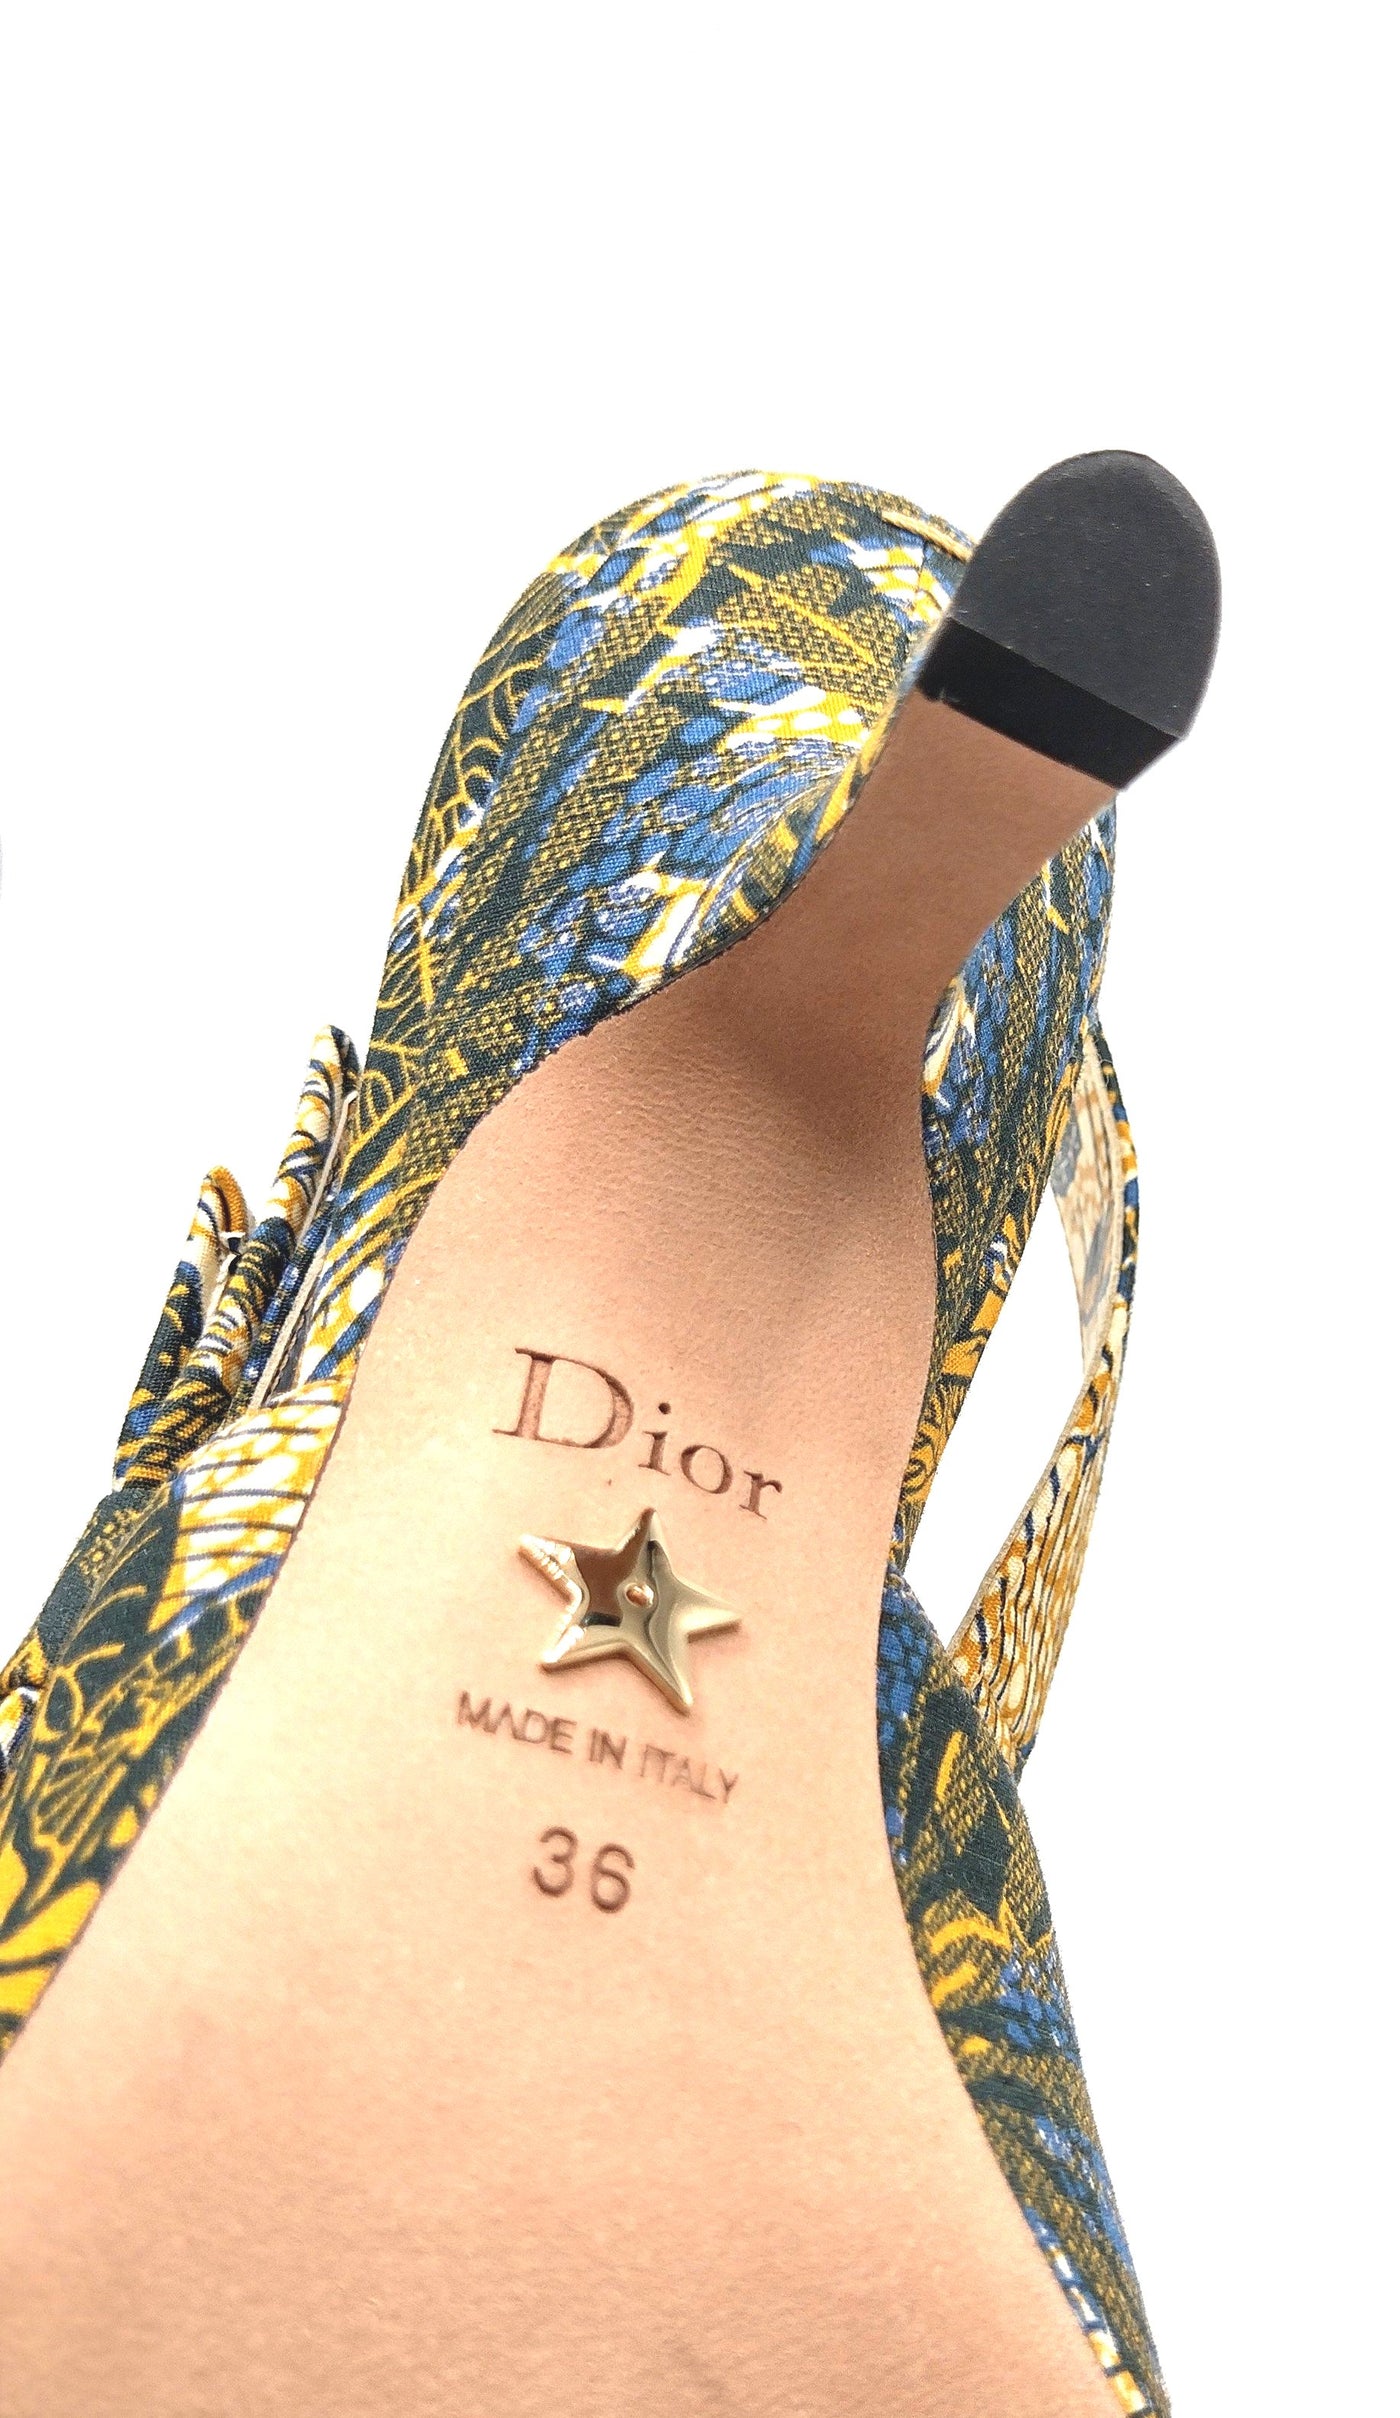 CHRISTIAN DIOR cruise 2020 Sweet D sling back size 36 never worn RRP: £850